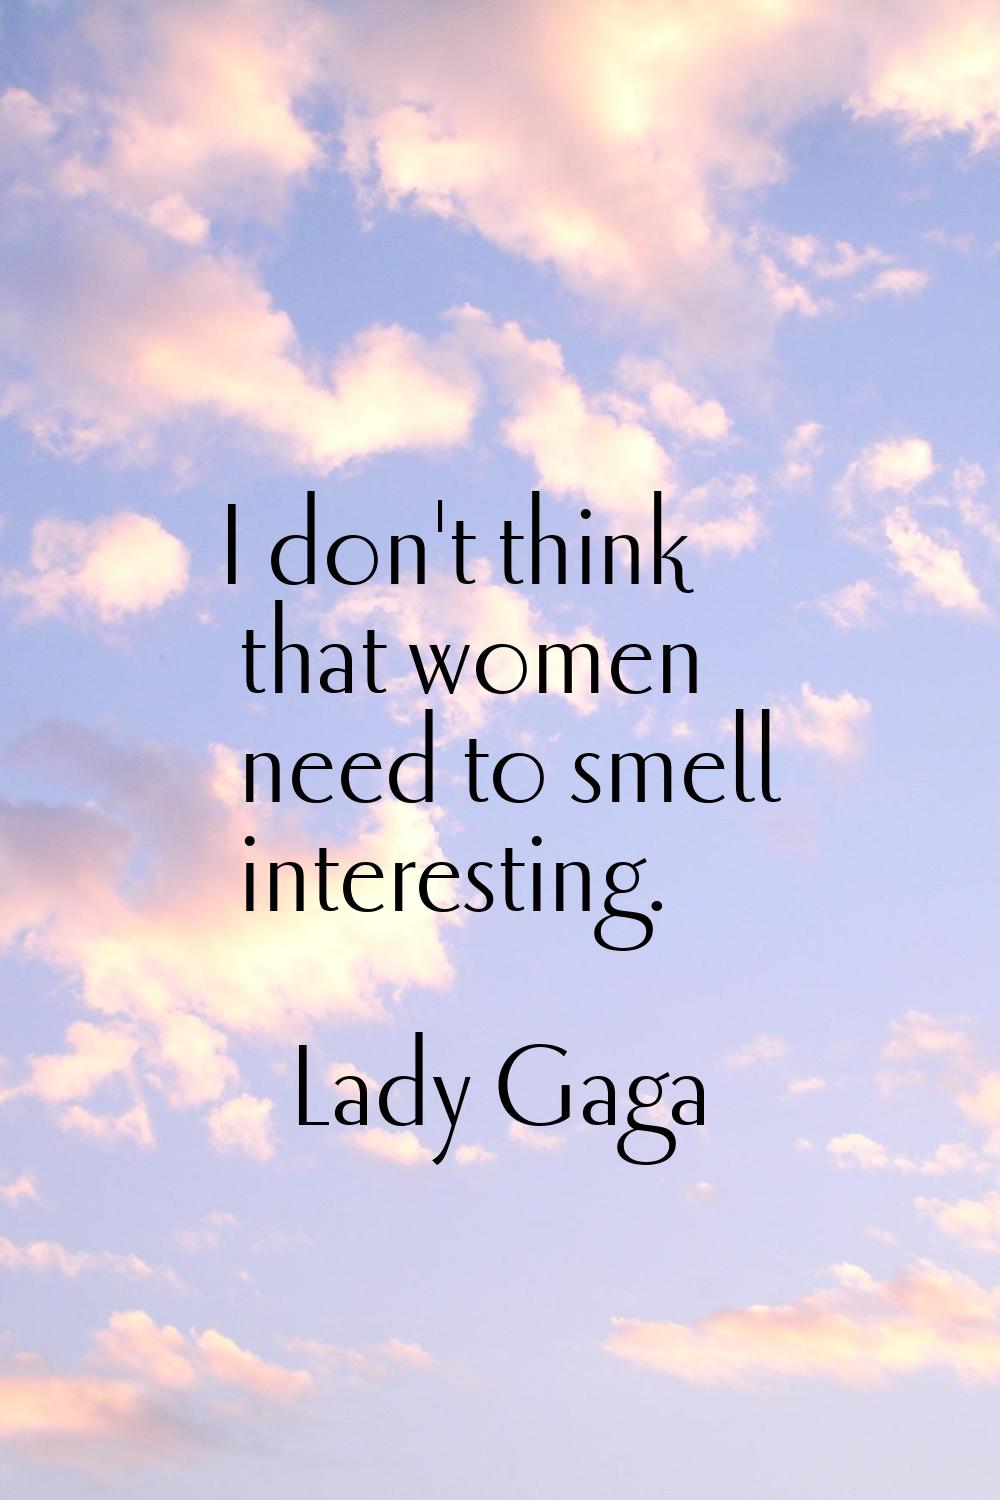 I don't think that women need to smell interesting.